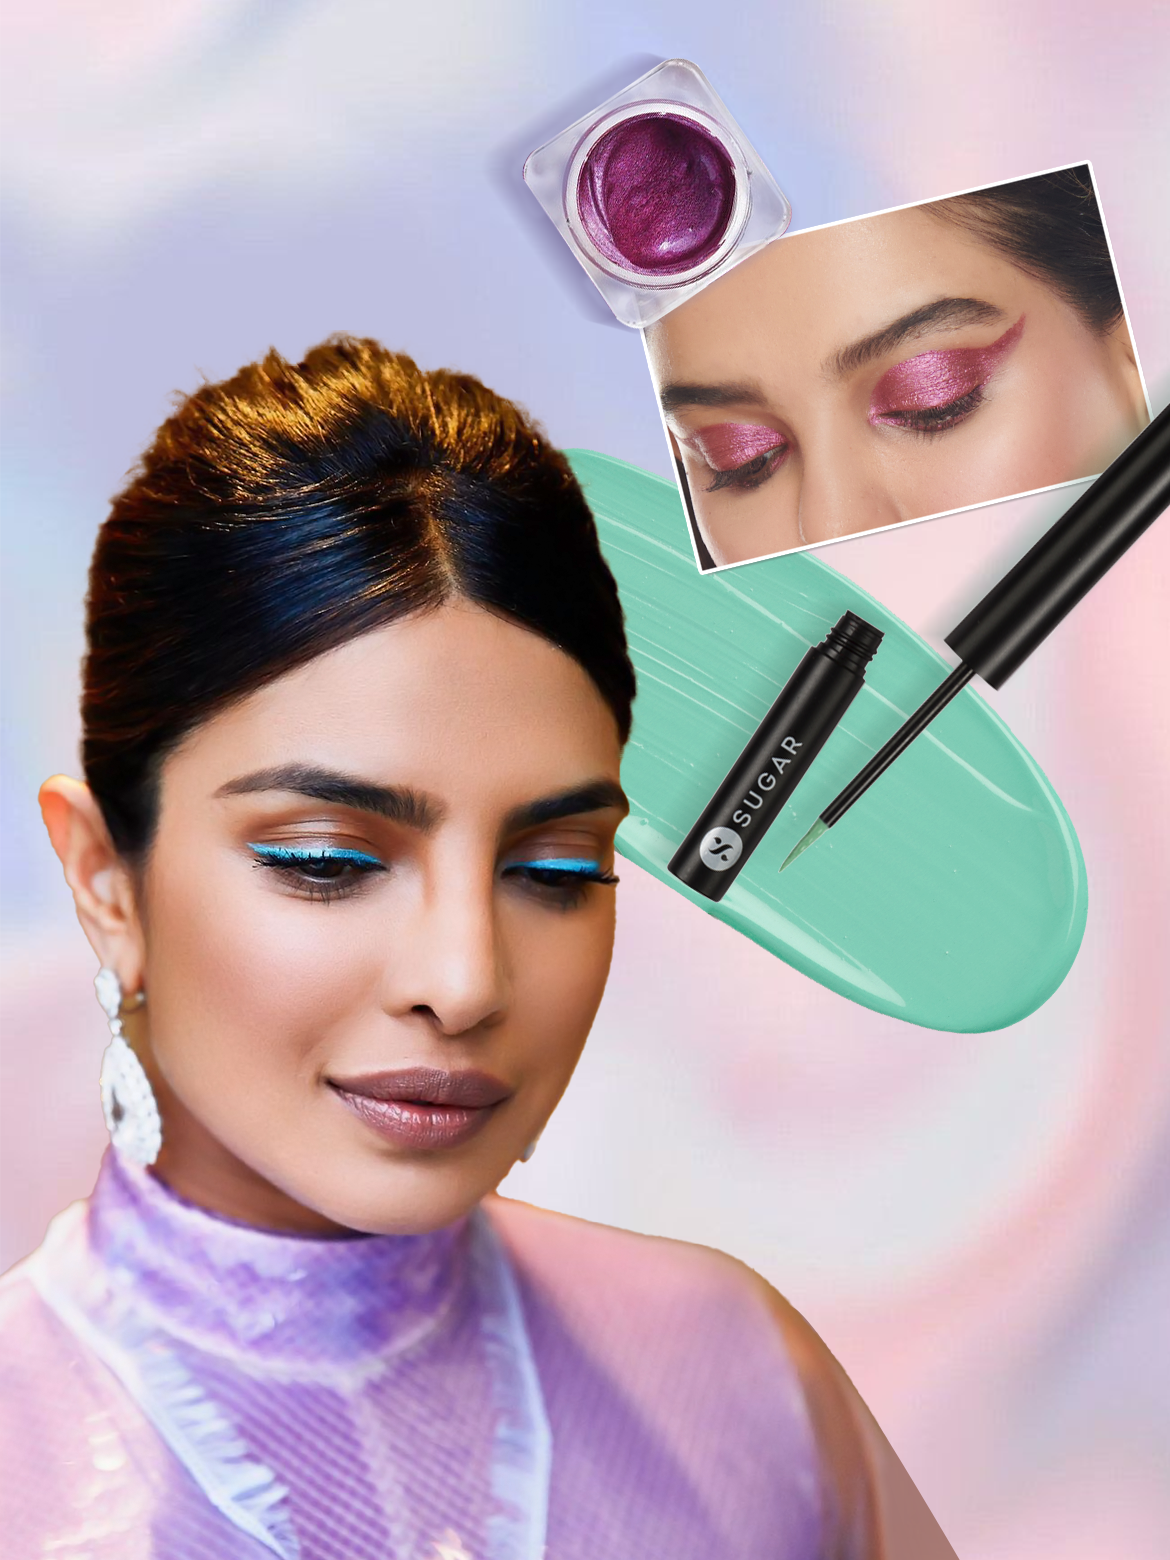 7 Bright Eye Makeup Trends To Try - SUGAR Cosmetics